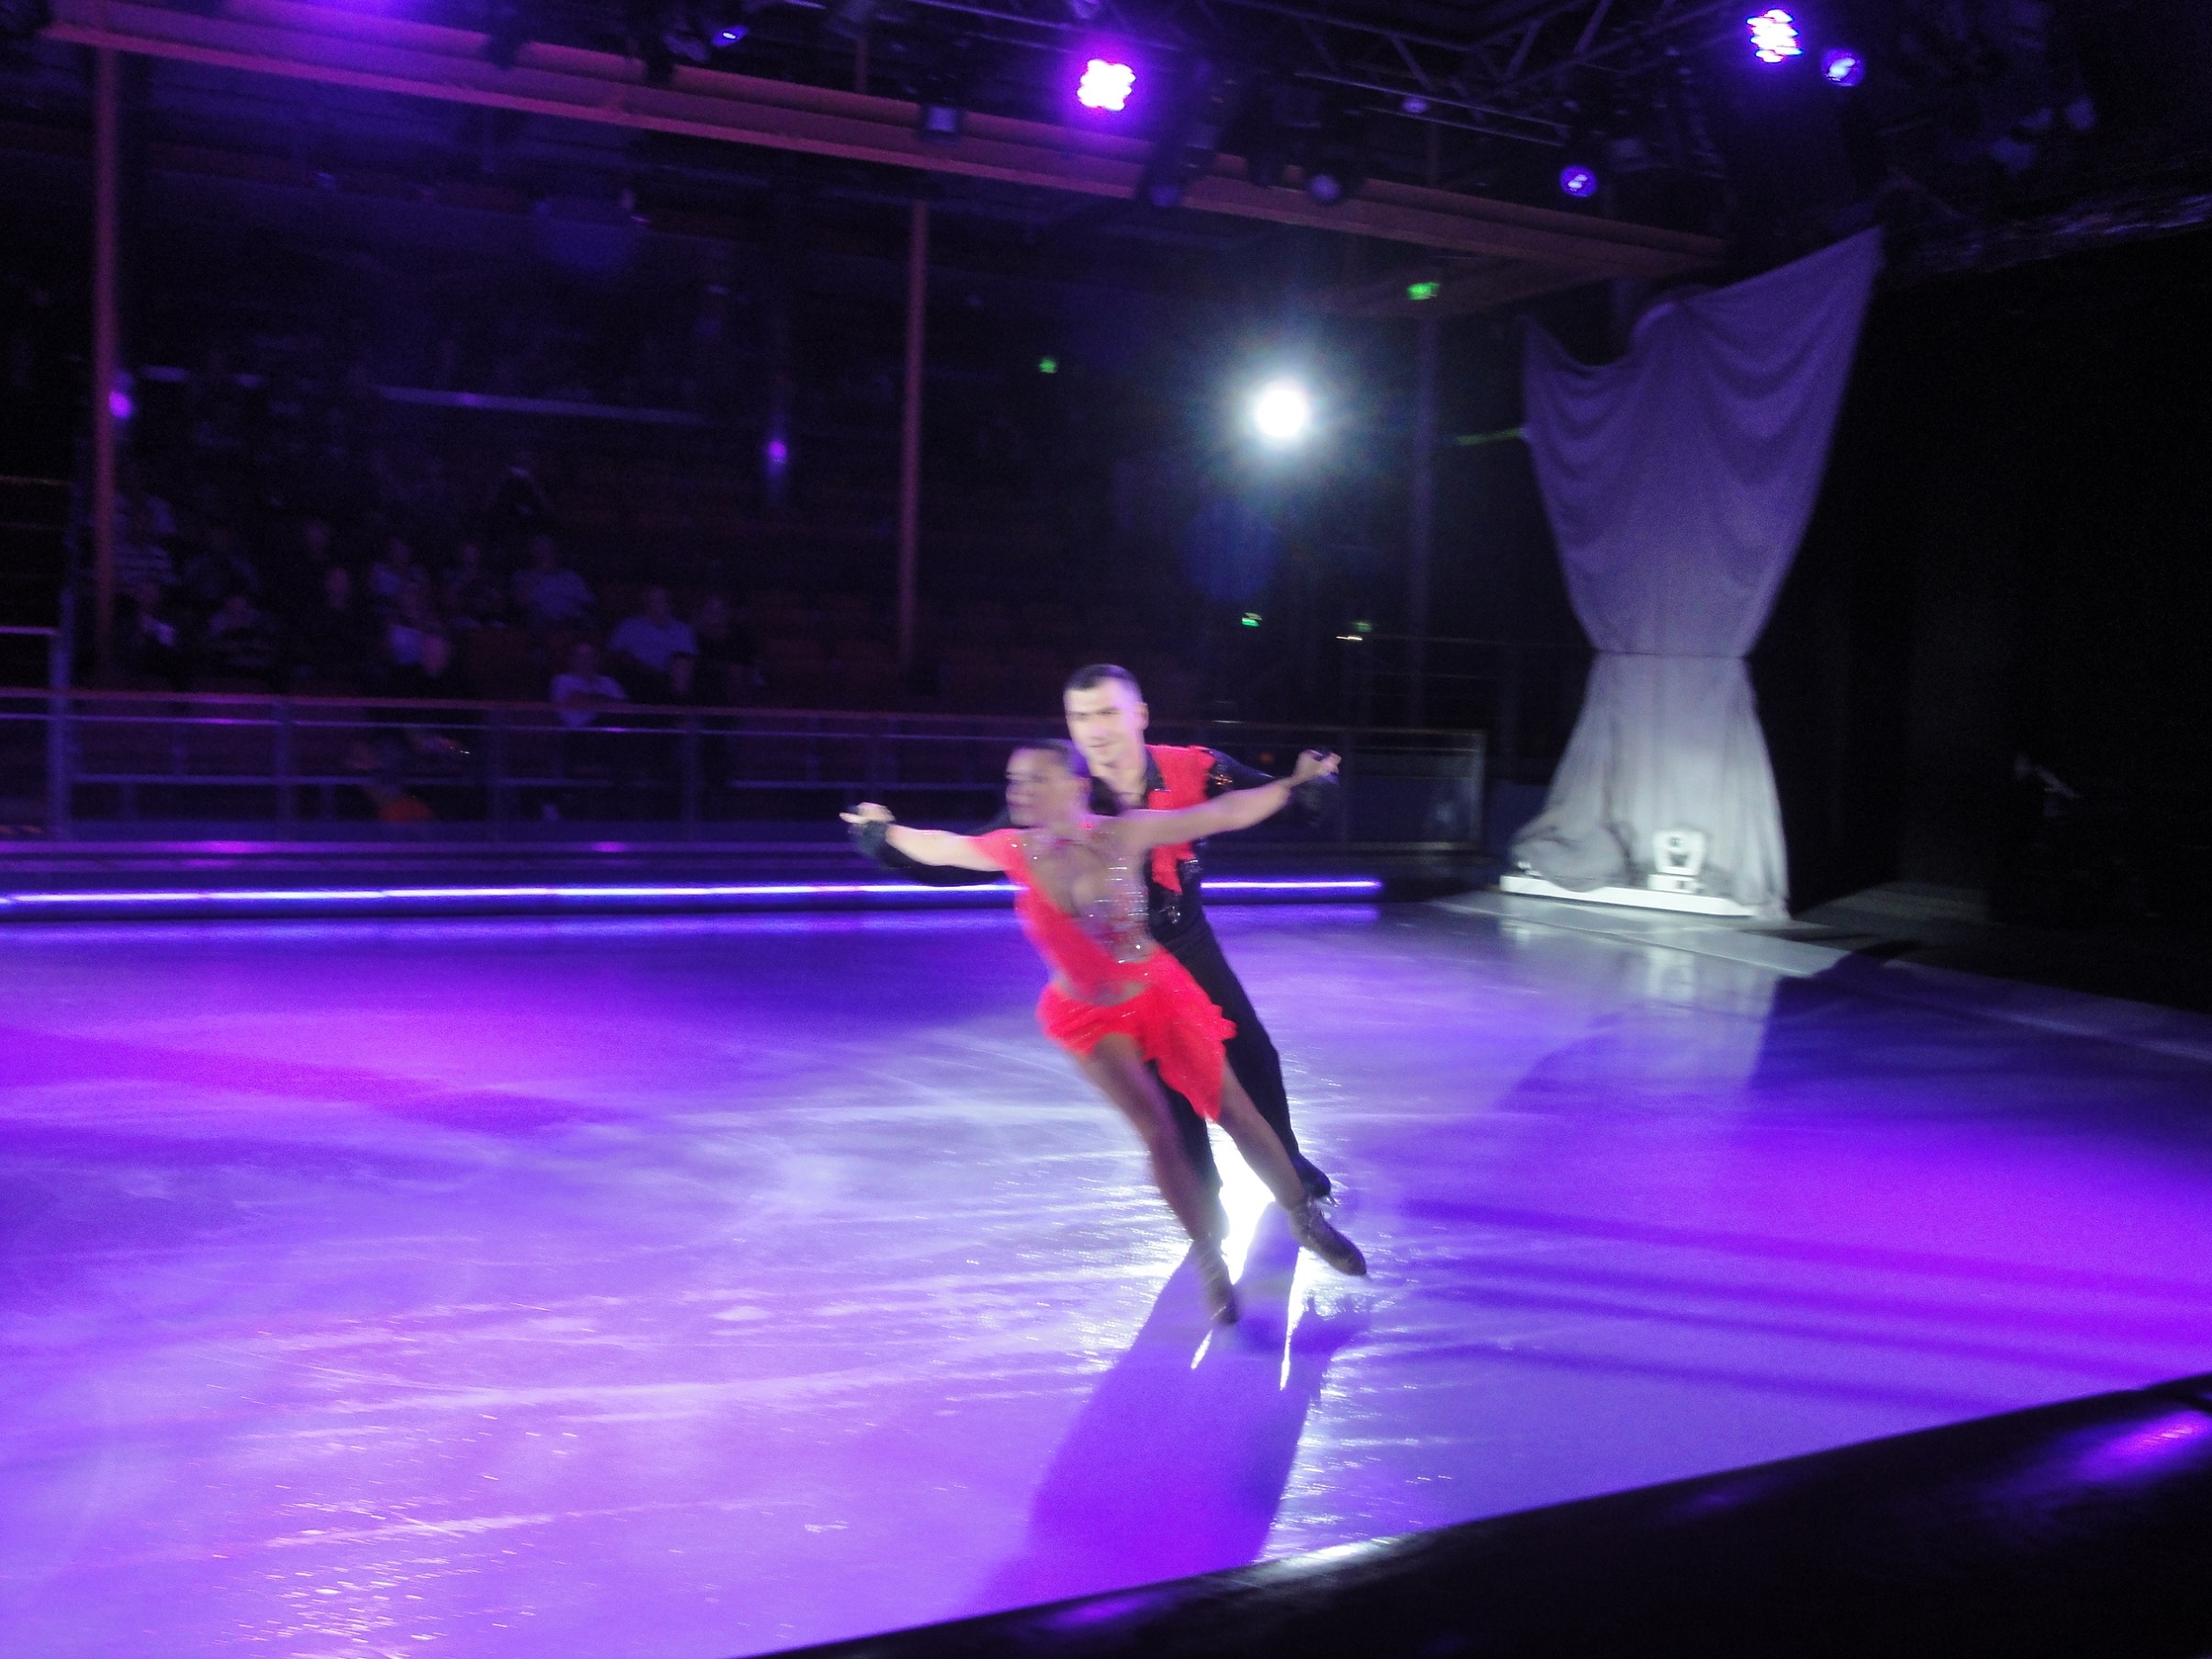 Ice Skating Show Onboard Mariner of the Seas